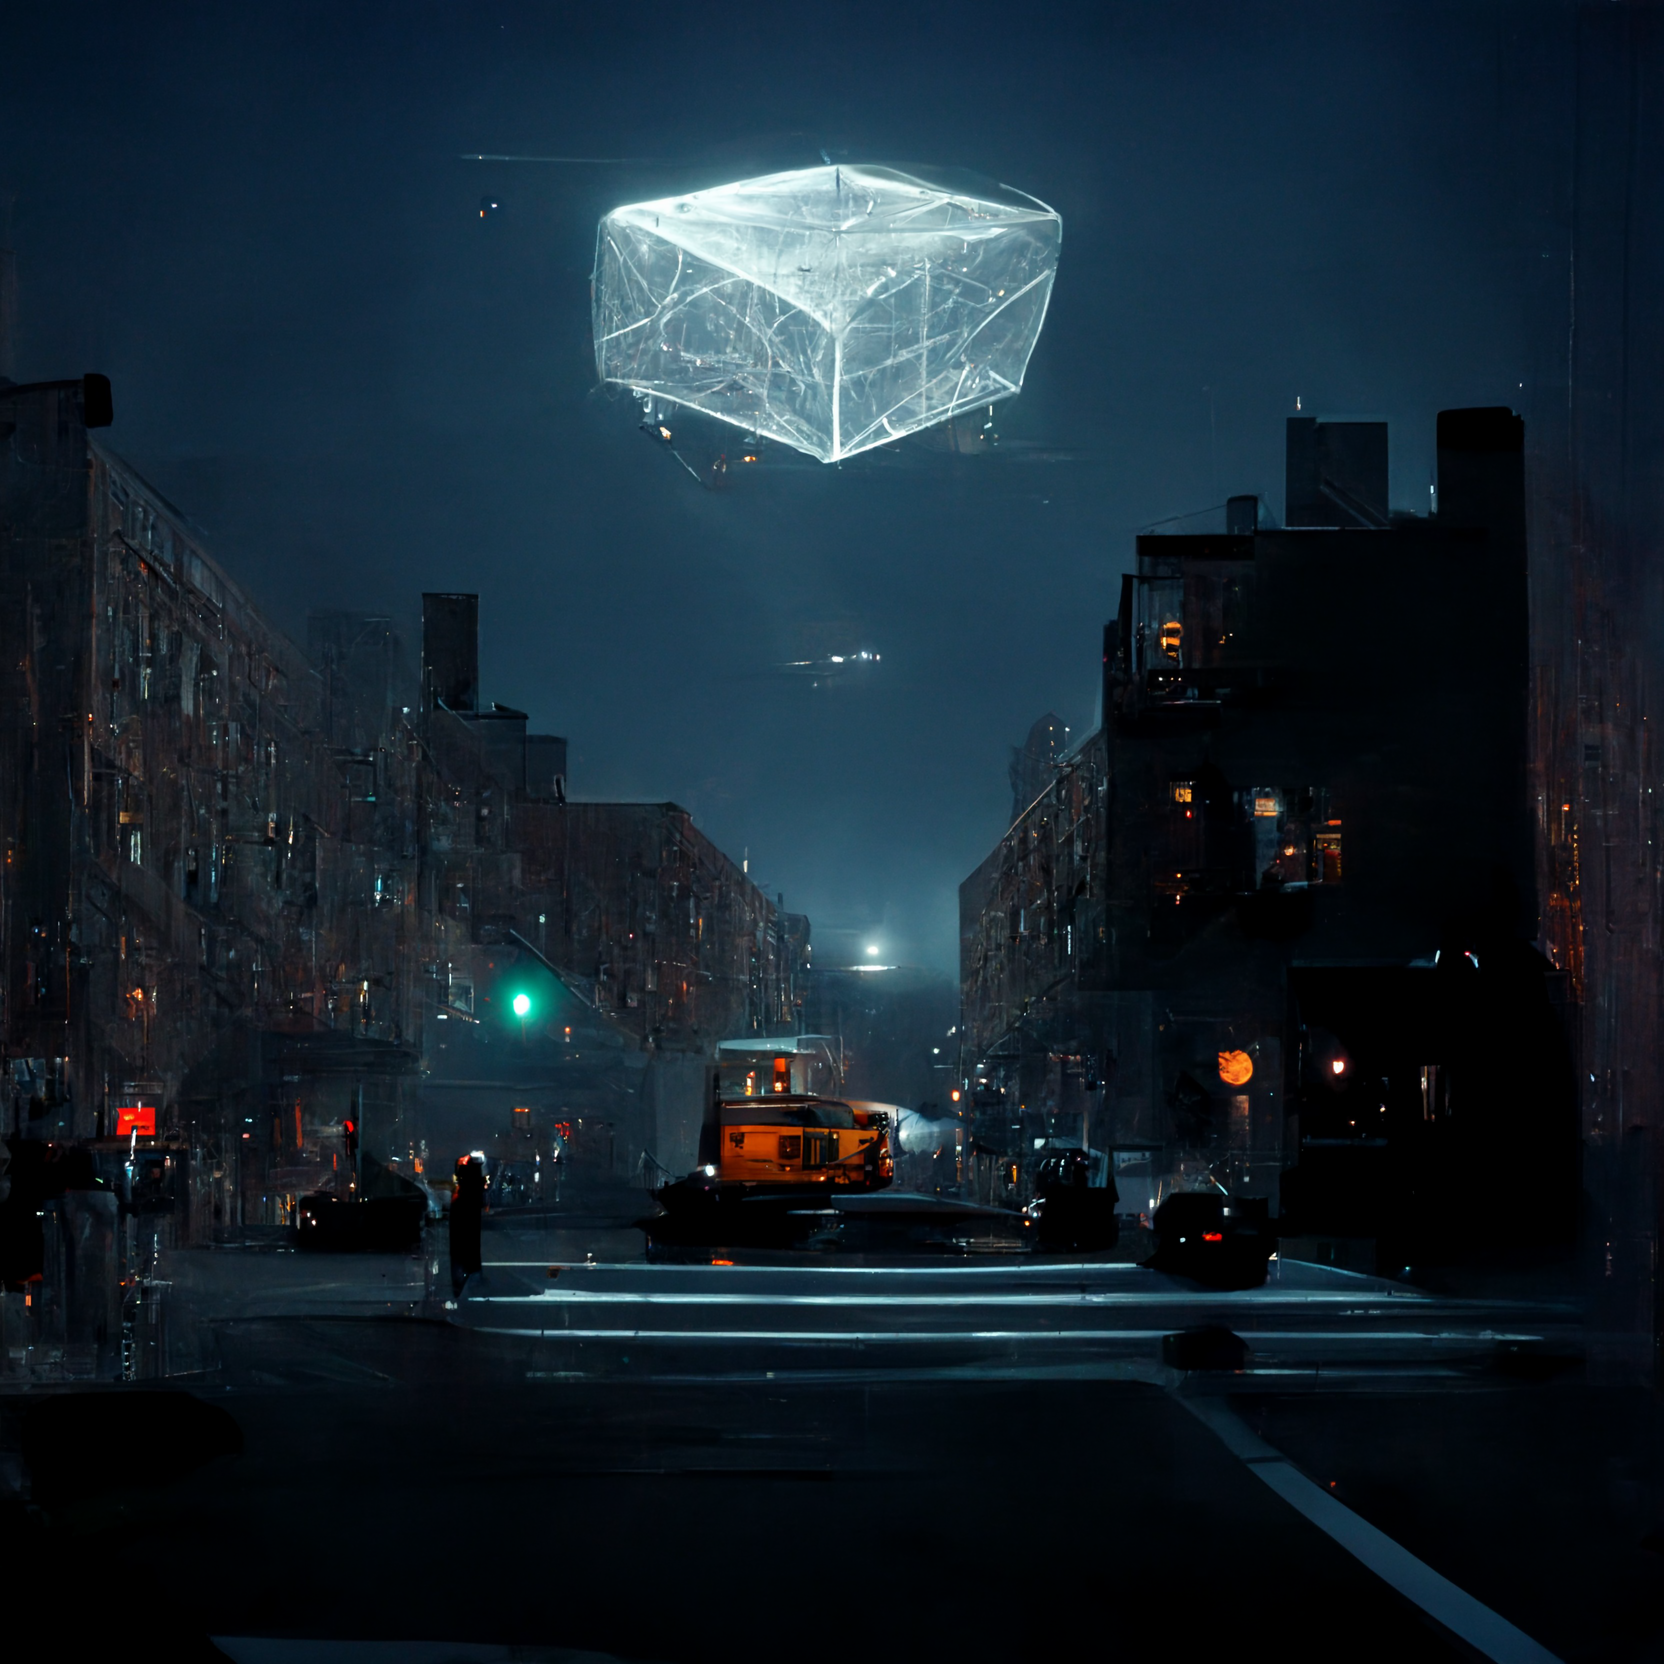 d0ce4bbf-1dea-4d76-ba40-2ef3e8cfea28_EllieMakes_wireframe_of_a_giant_glowing_squished_cube_hovering_above_a_Brooklyn_street_at_midnight_by_Edward_ho.png